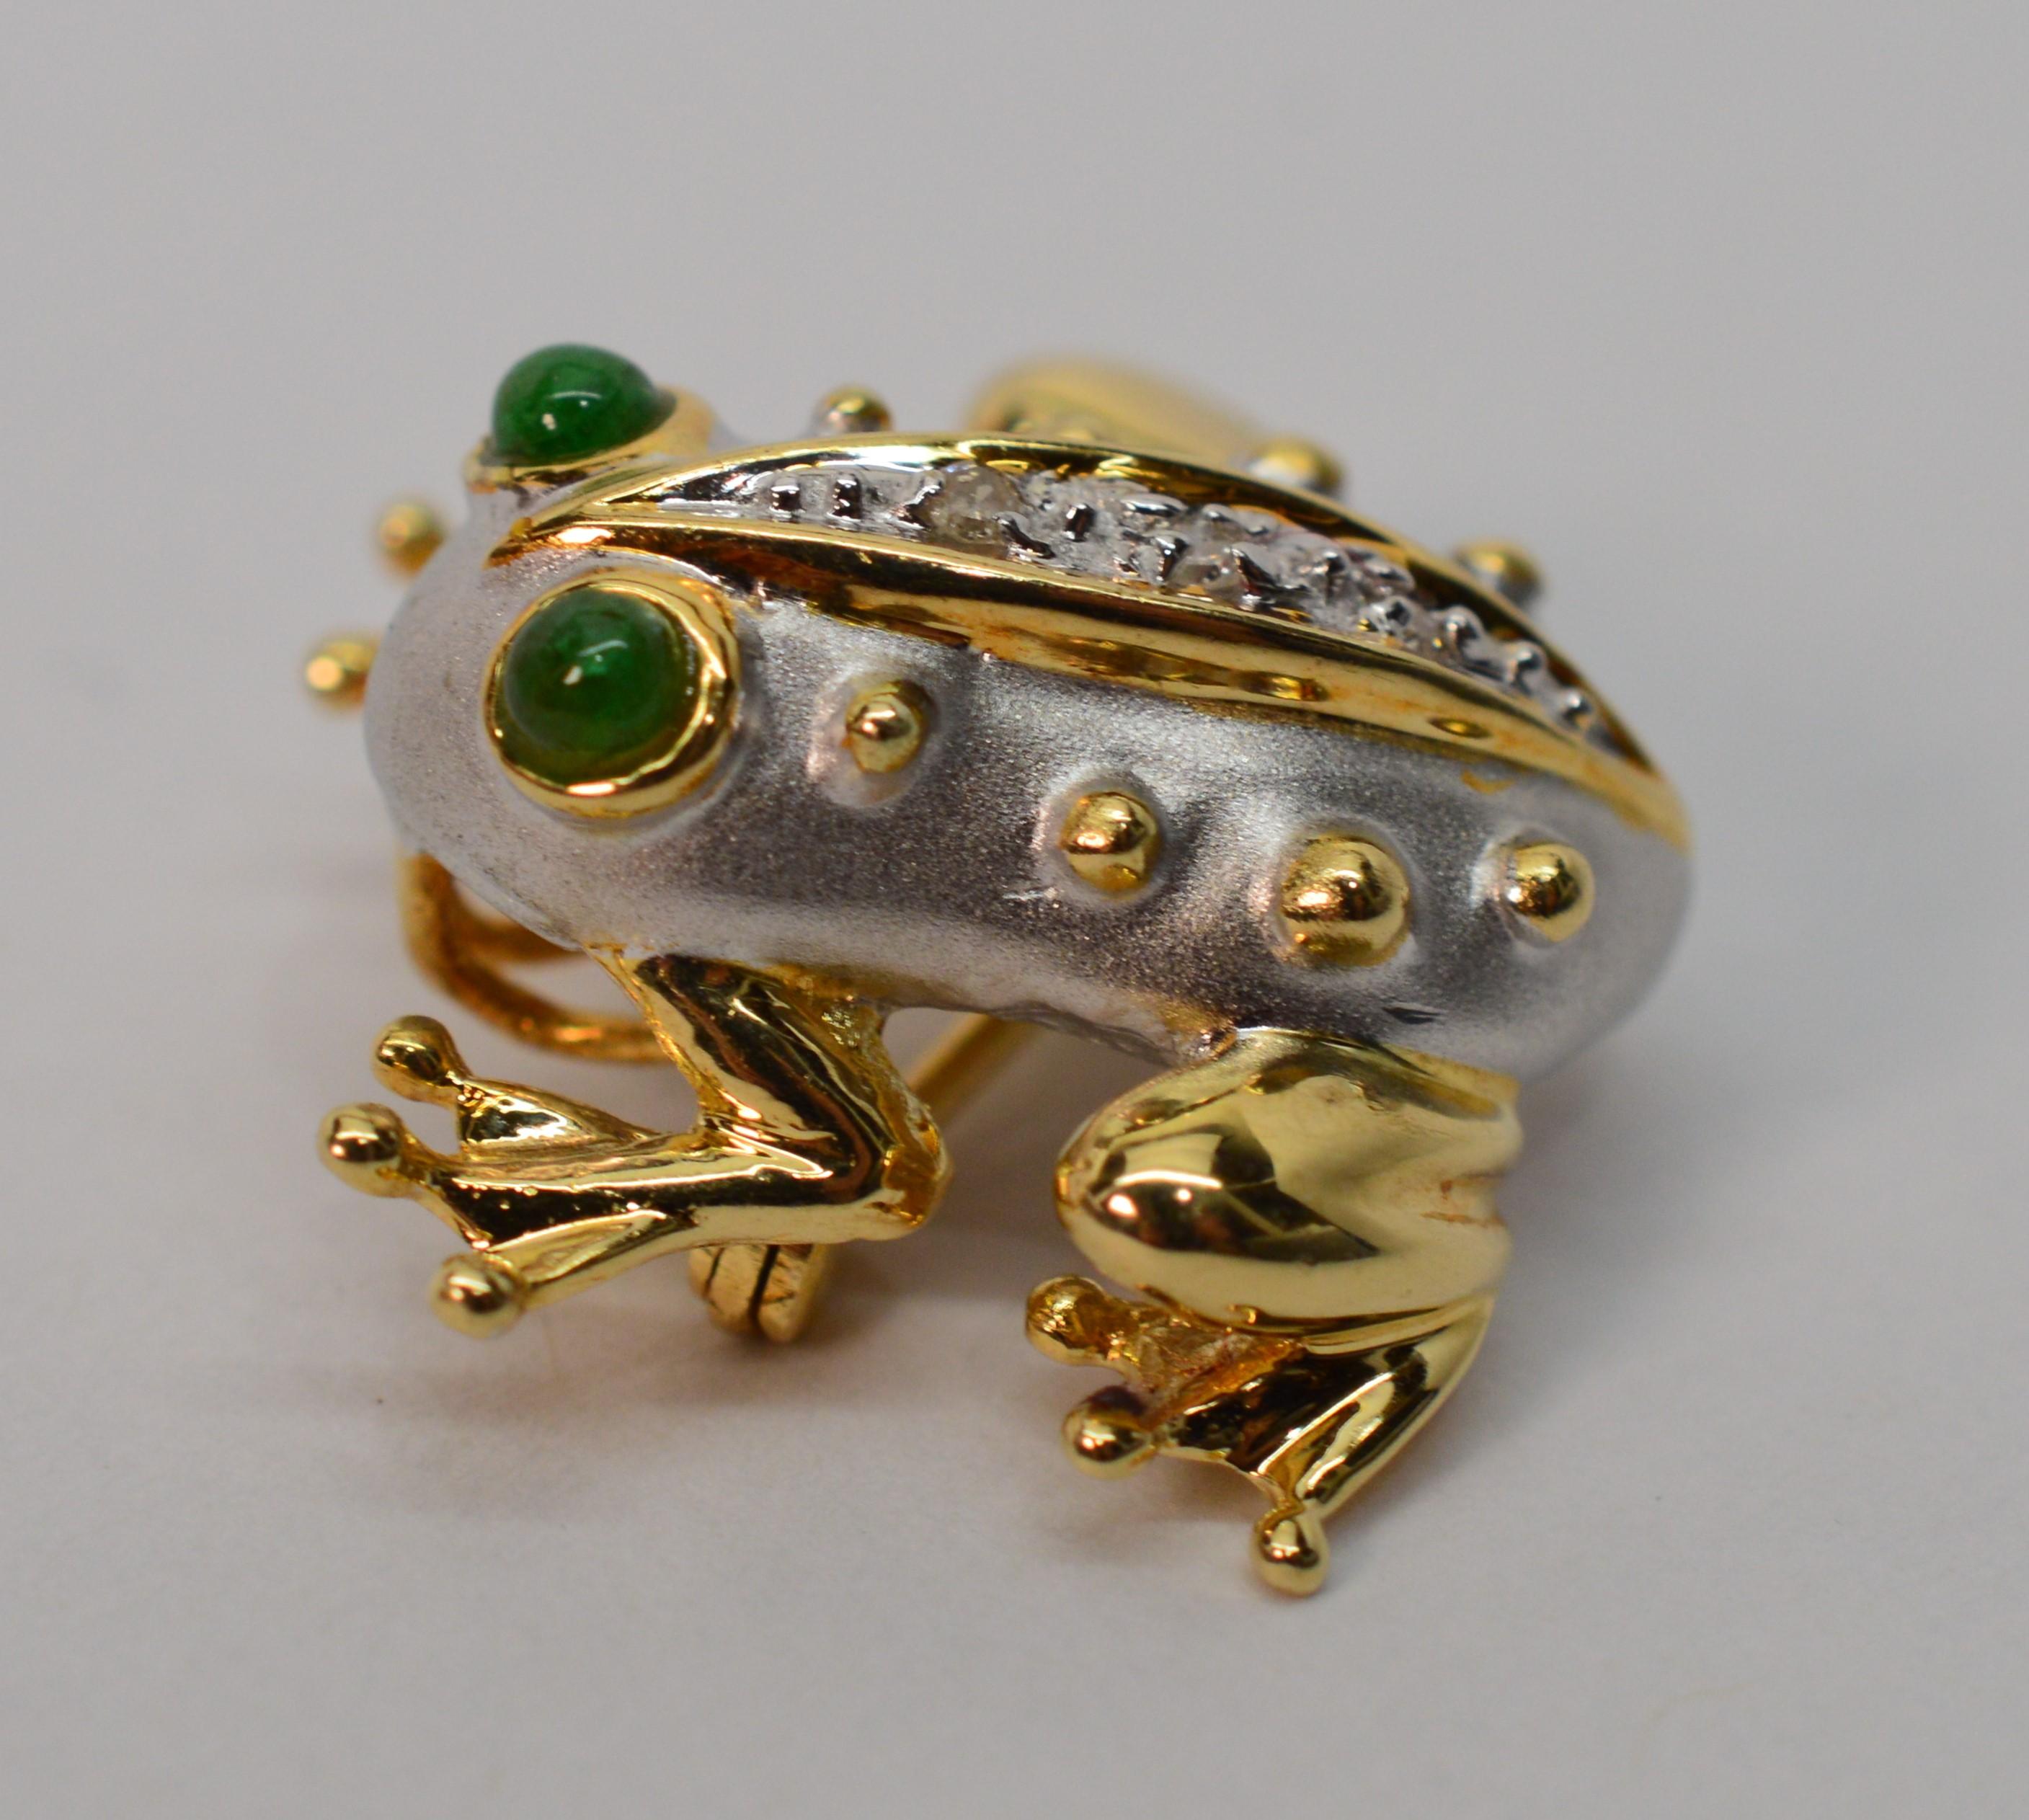 This adorable amphibian looks poised to take his next leap. Made of fourteen karat 14k yellow gold with hand painted rhodium accents, emerald cabochons serve as eyes and faceted diamond accents enhance his back. The piece is fitted with a bail to be